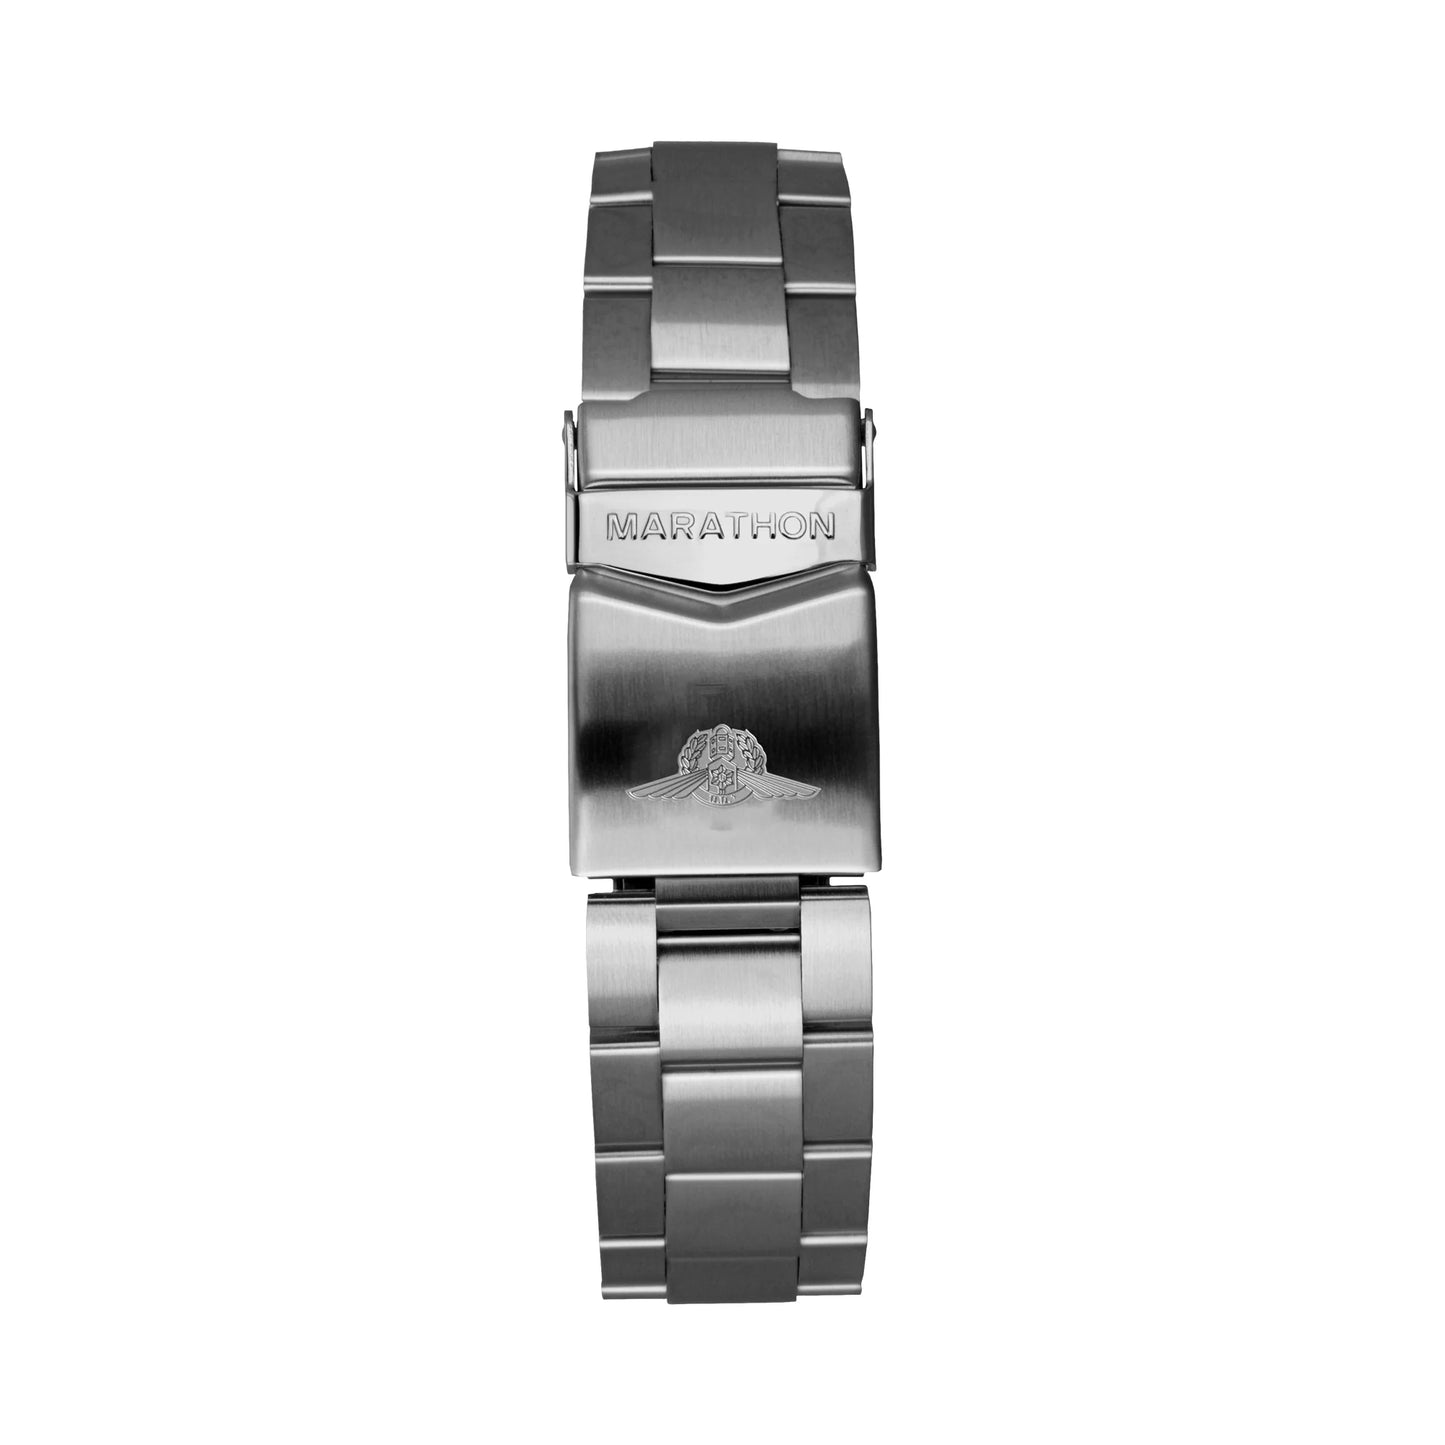 ARCTIC EDITION JUMBO DAY/DATE AUTOMATIC (JDD) WITH STAINLESS STEEL BRACELET - 46MM